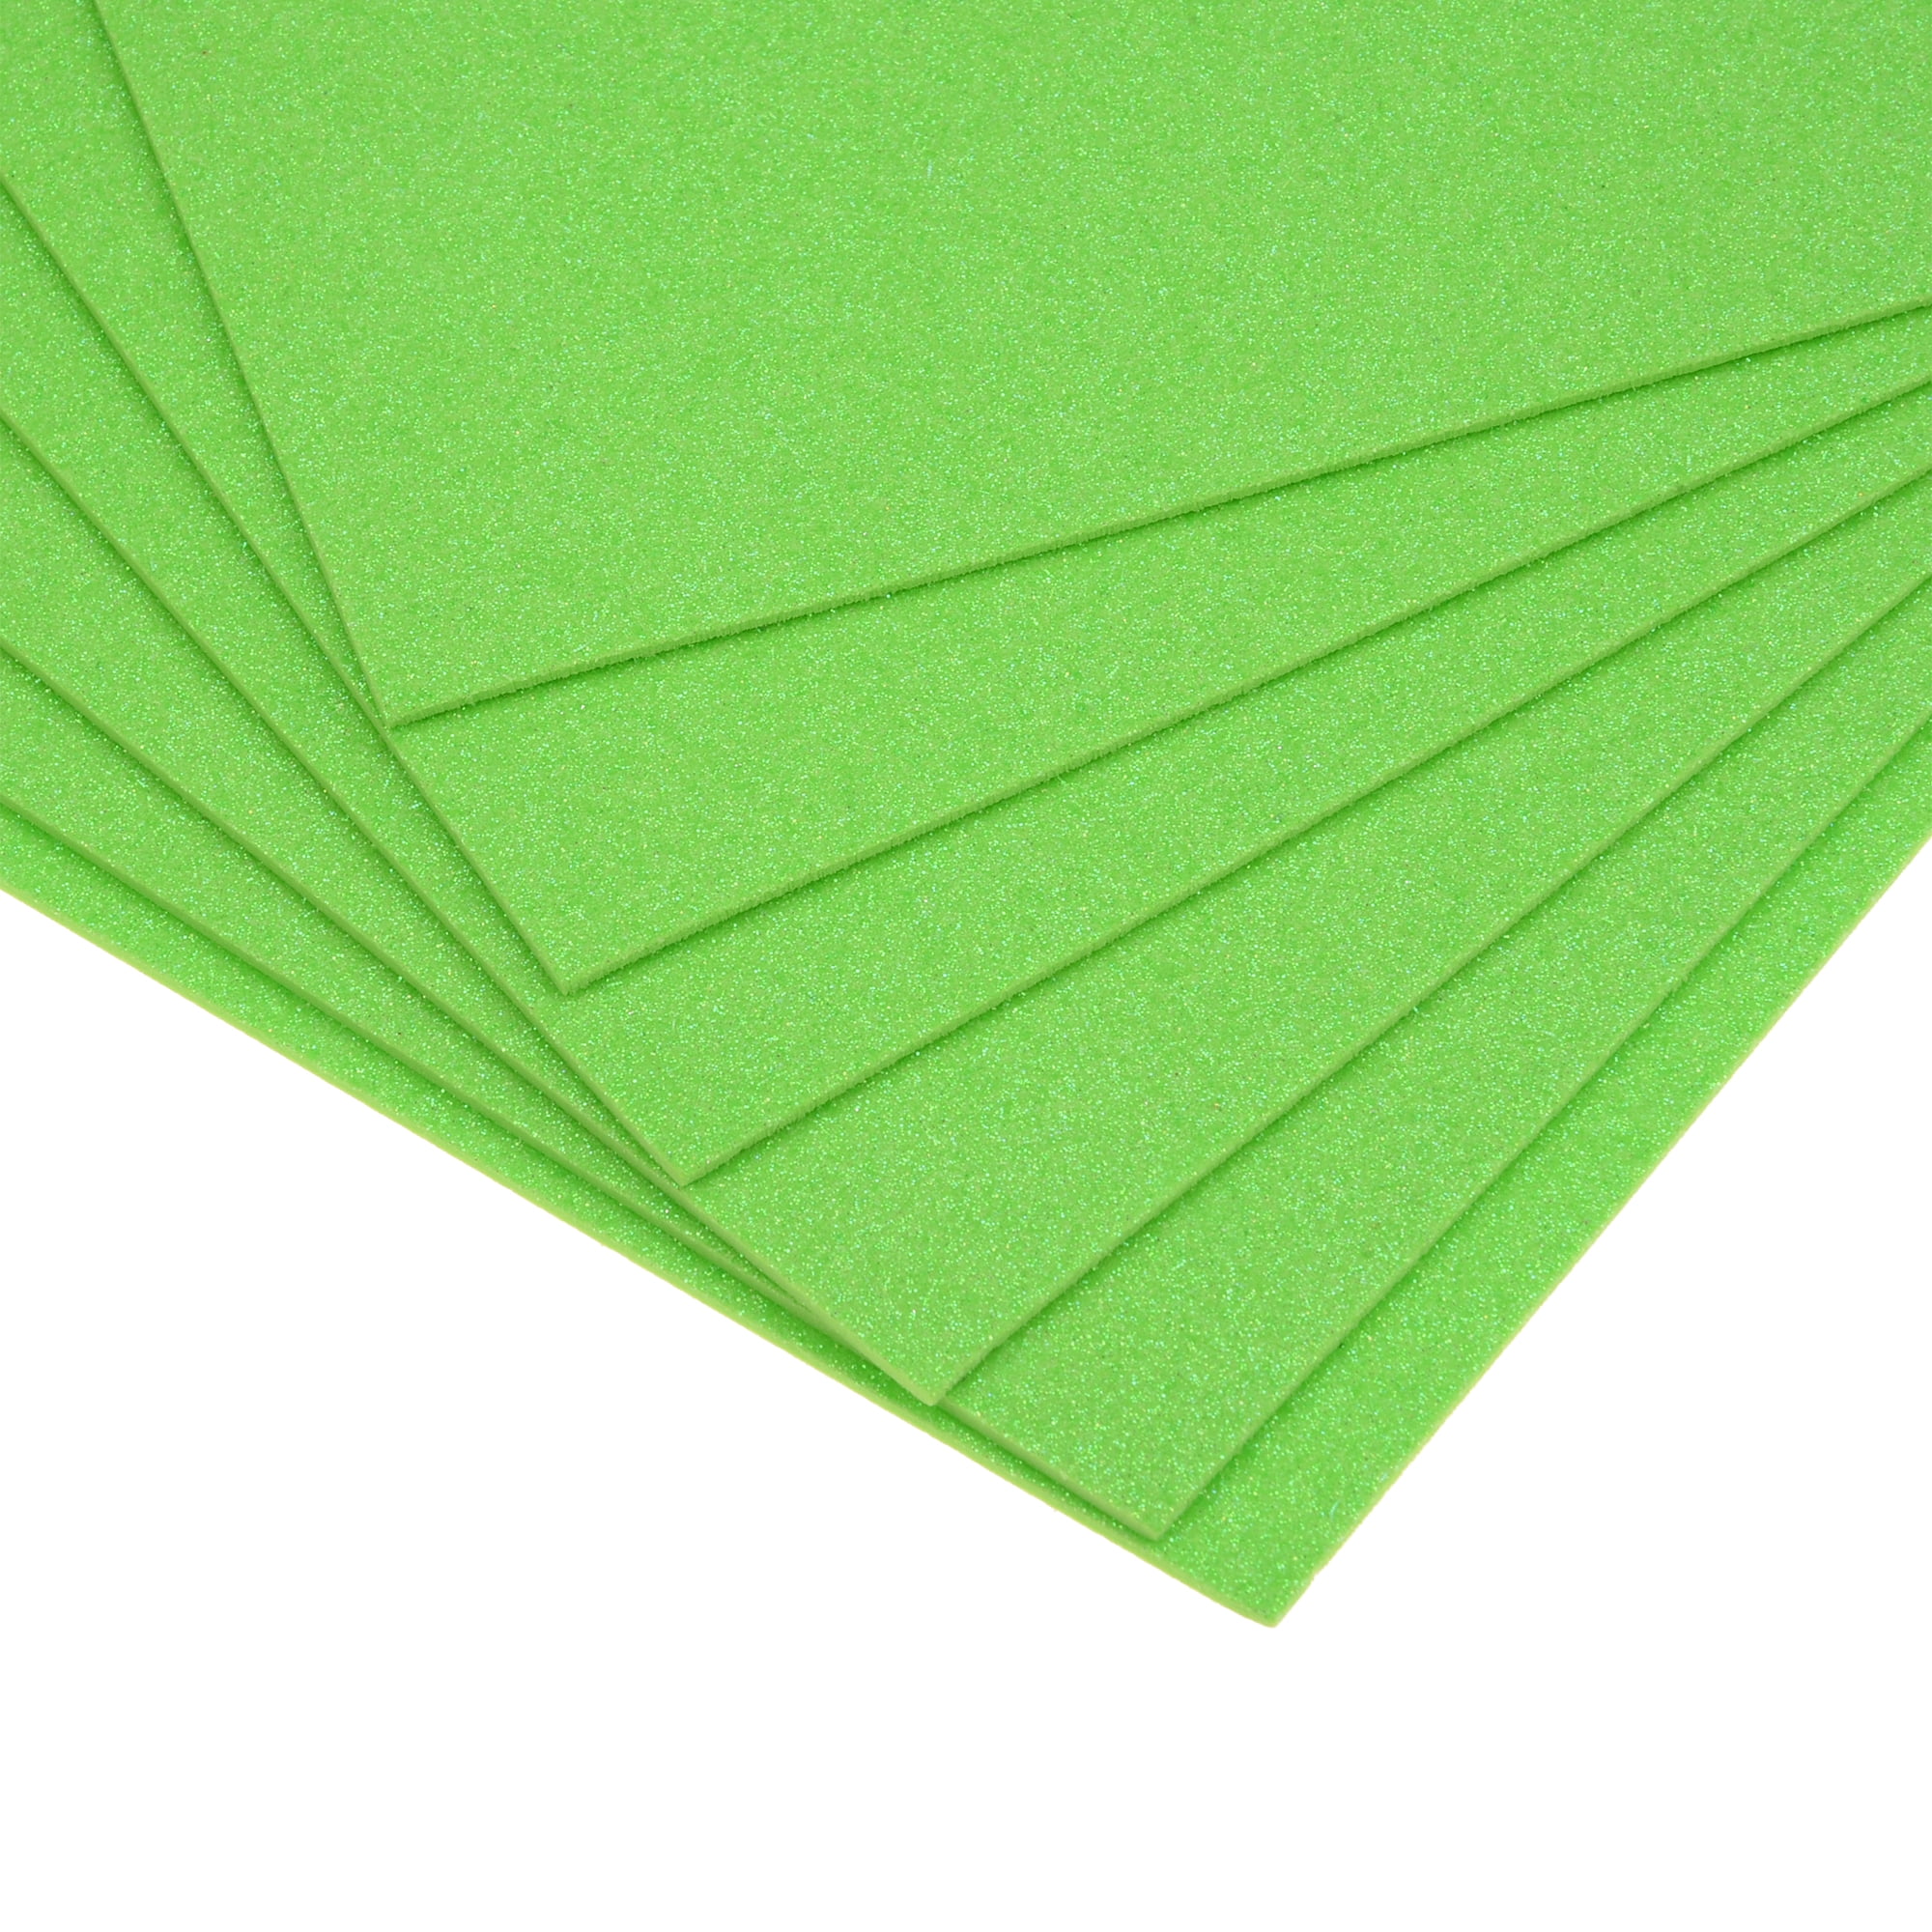 Buy Bauzooka Eva Foam Sheet For Art & Craft With 5 Different Color A4 Size  3mm Thickness Online at Low Prices in India 